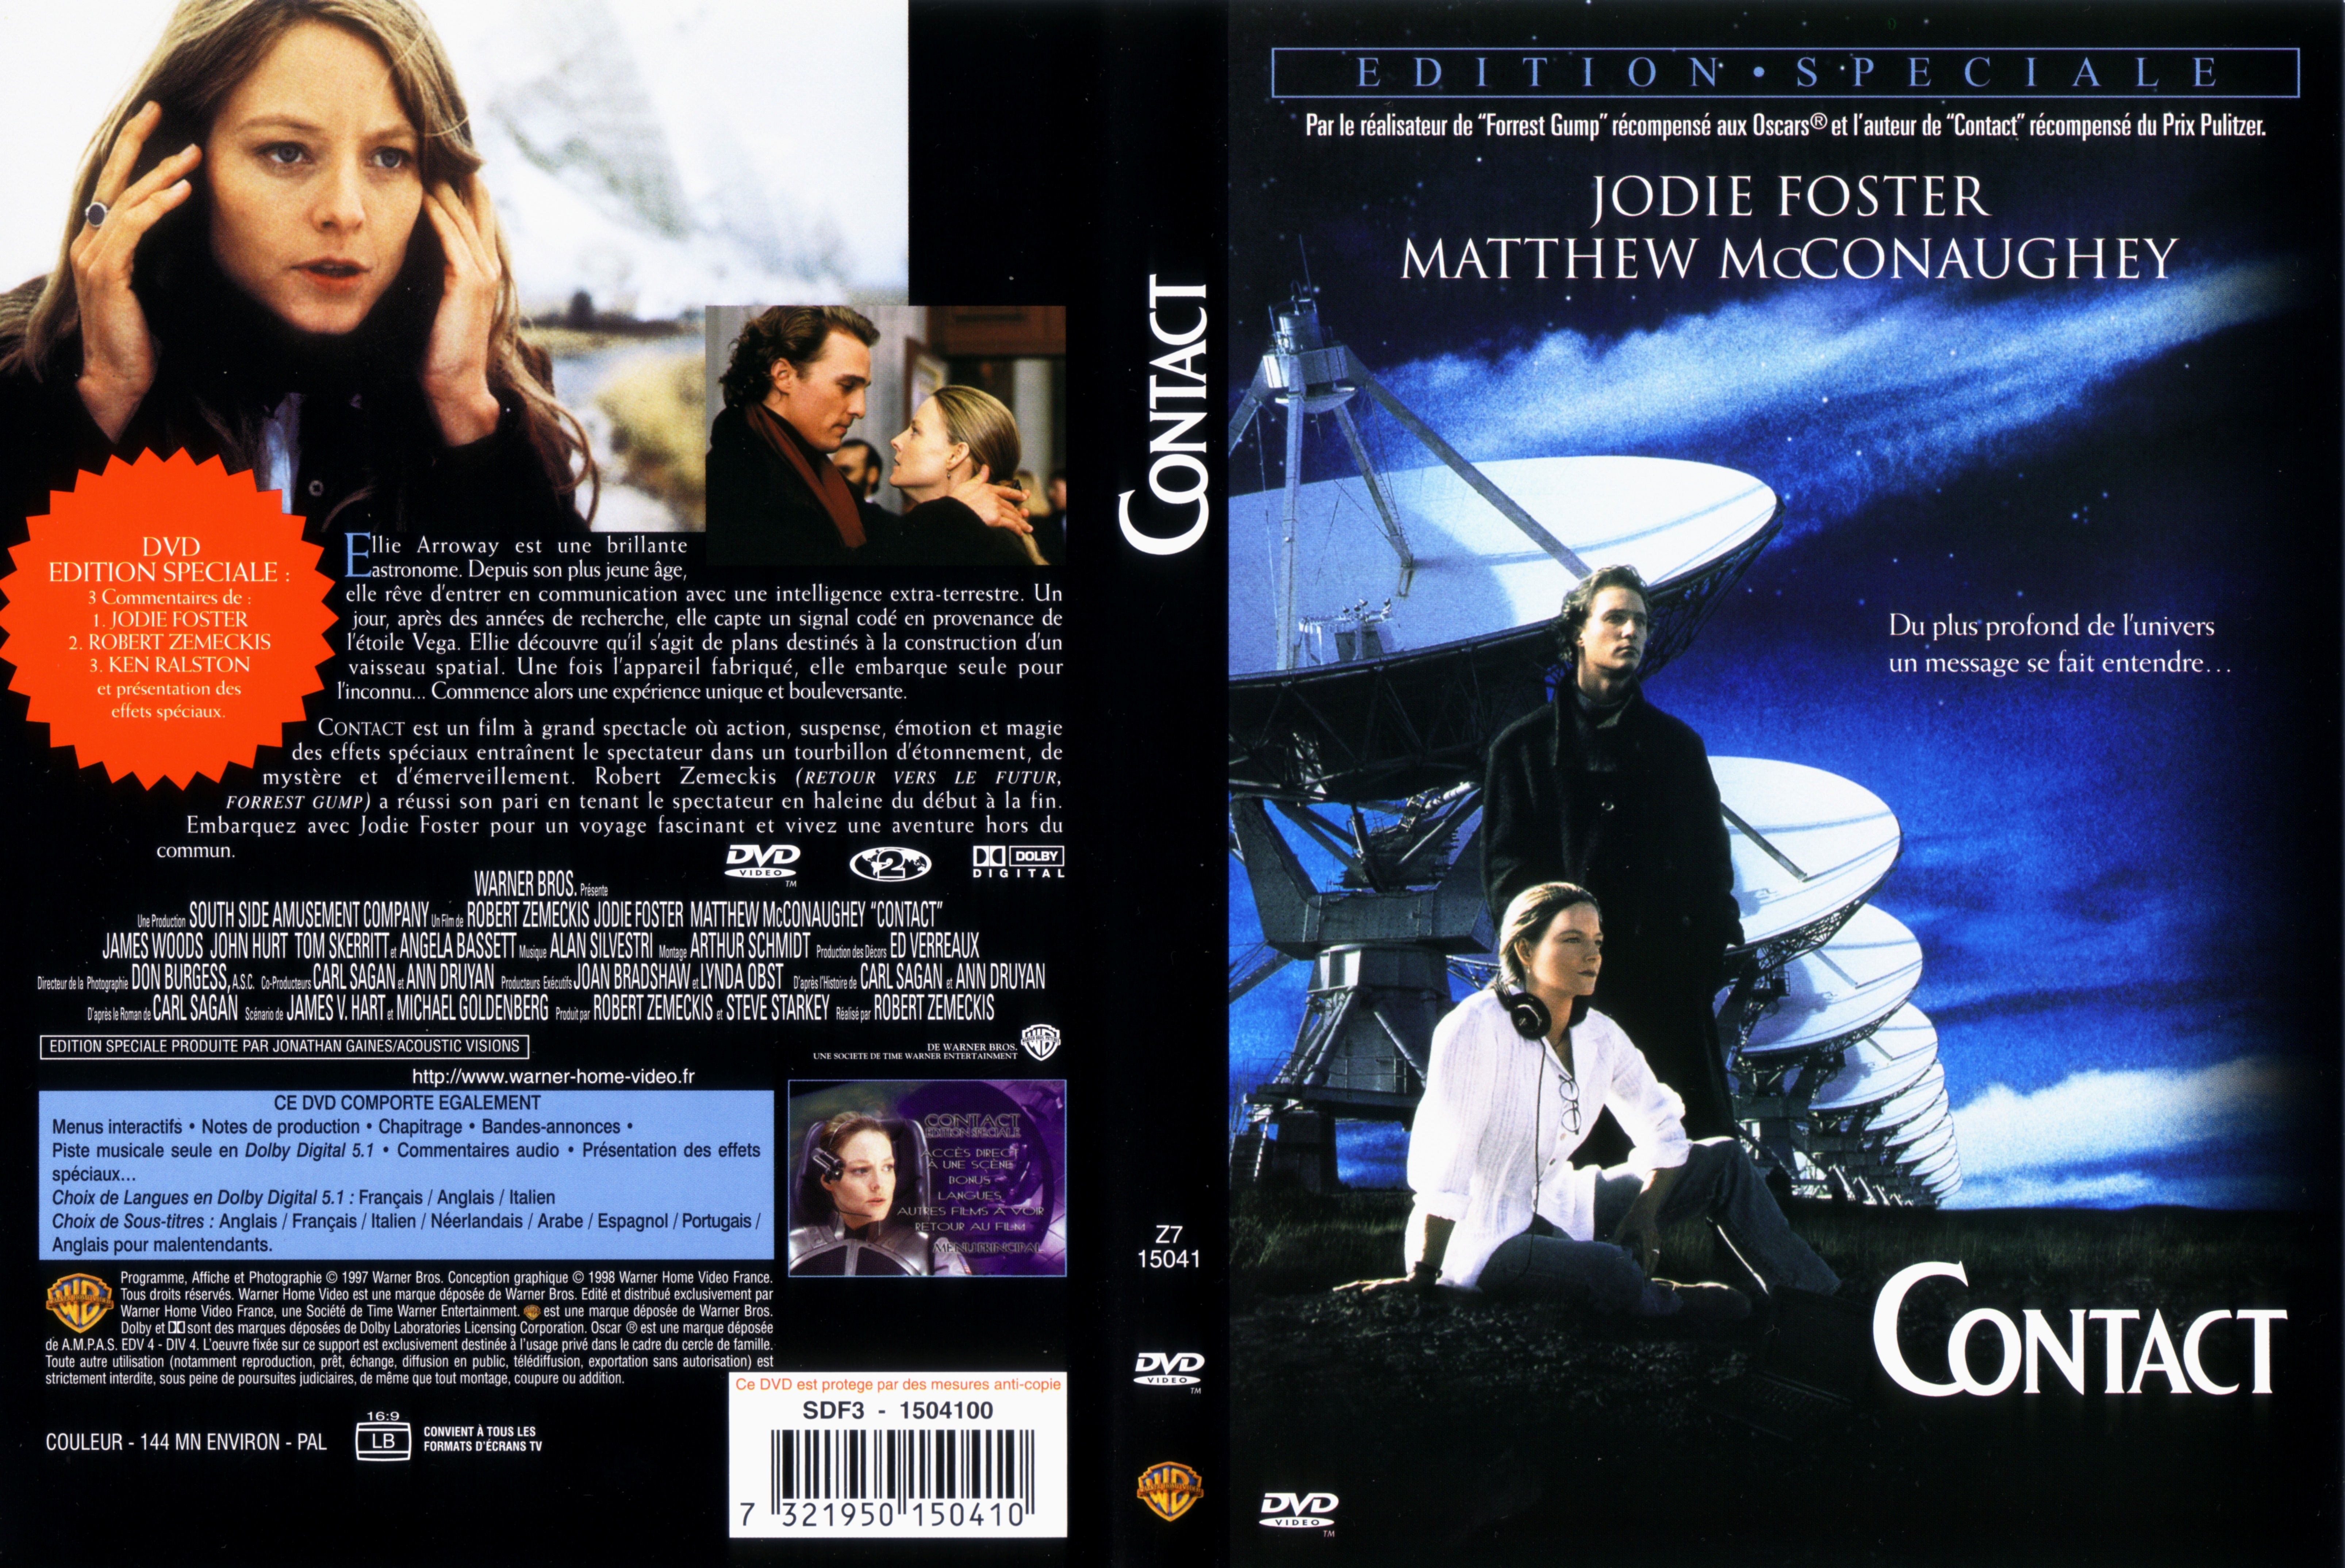 Jaquette DVD Contact